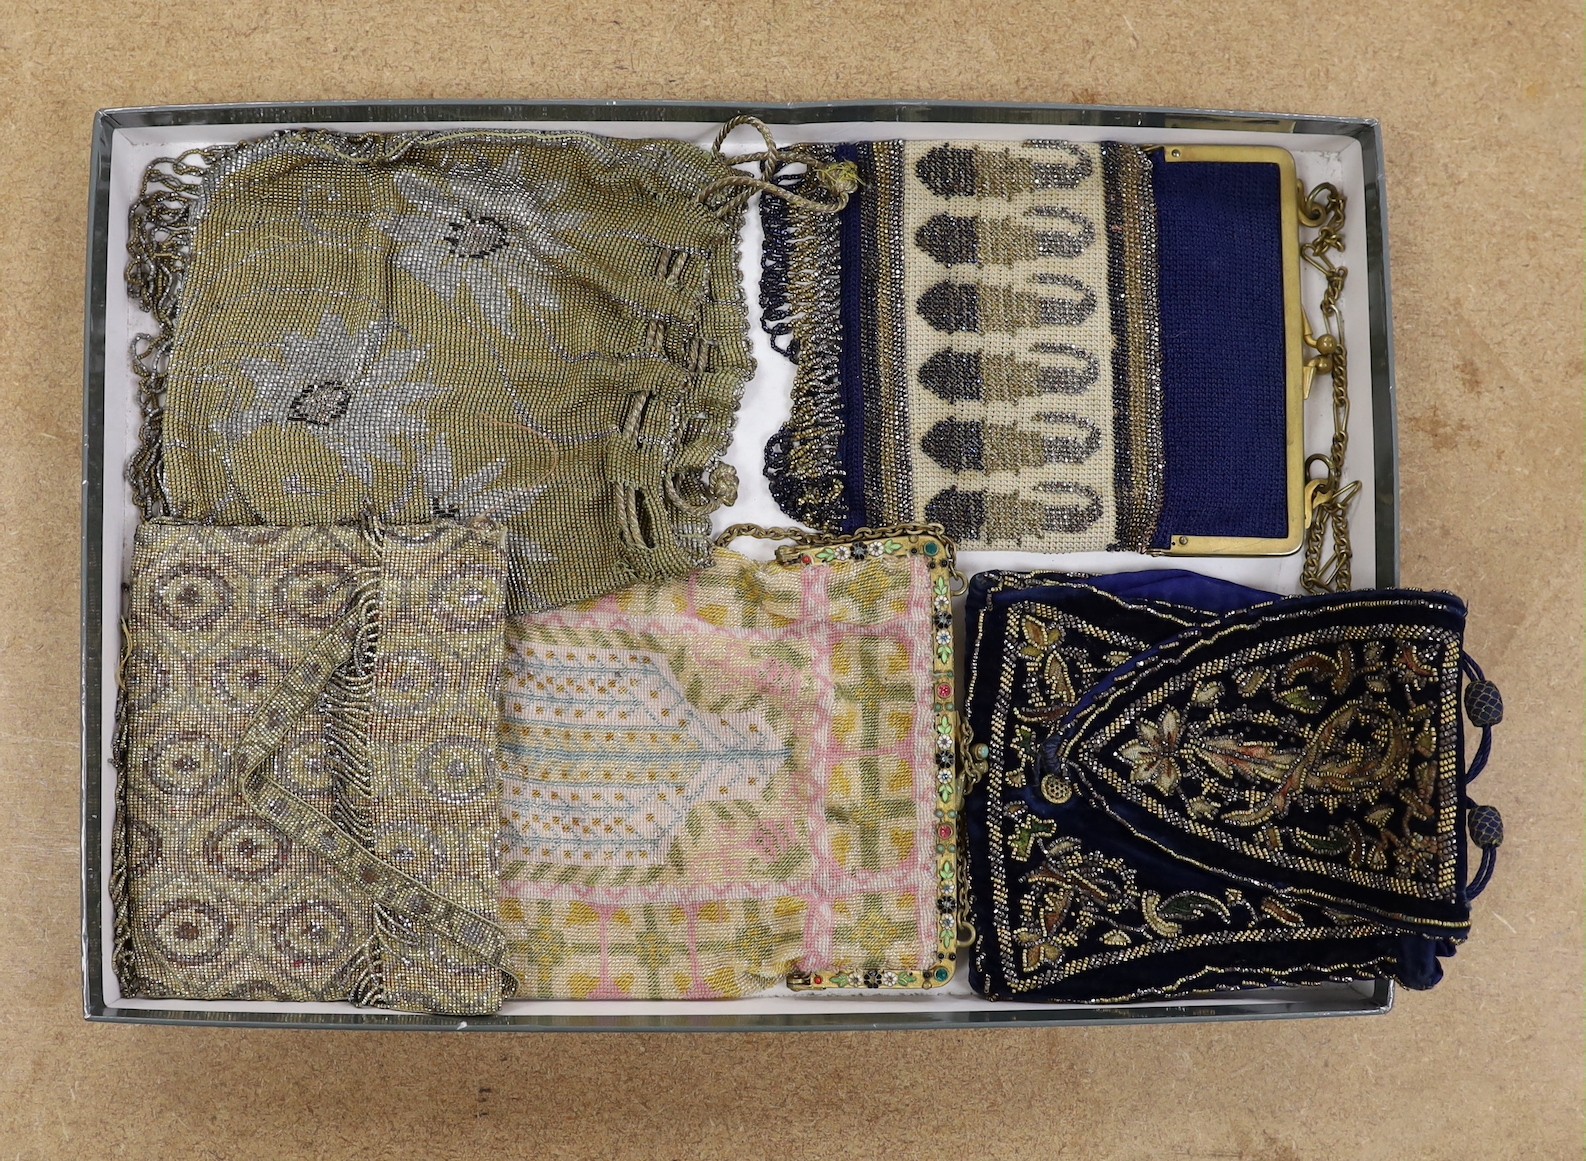 Four late 19th, early 20th century cut steel and finely beaded bags and another similar beaded bag